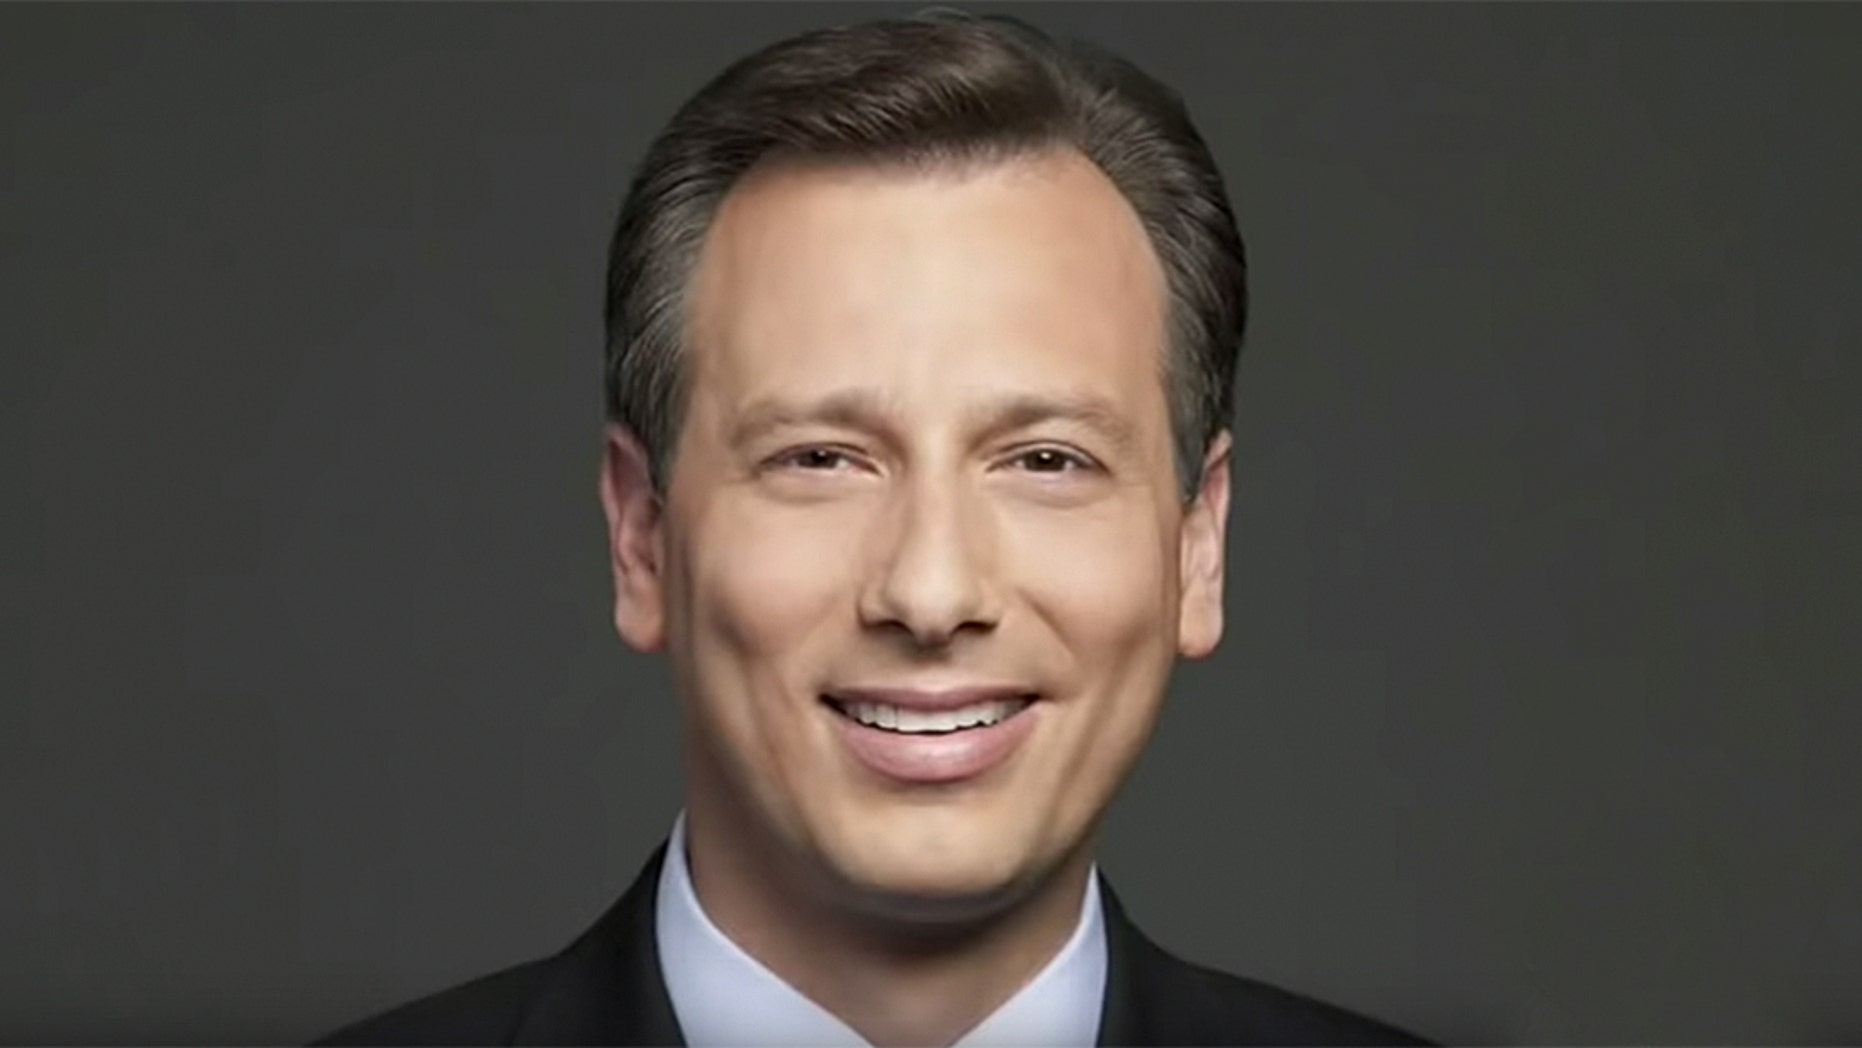 Chris Burrous died from a methamphetamine overdose, officials say.